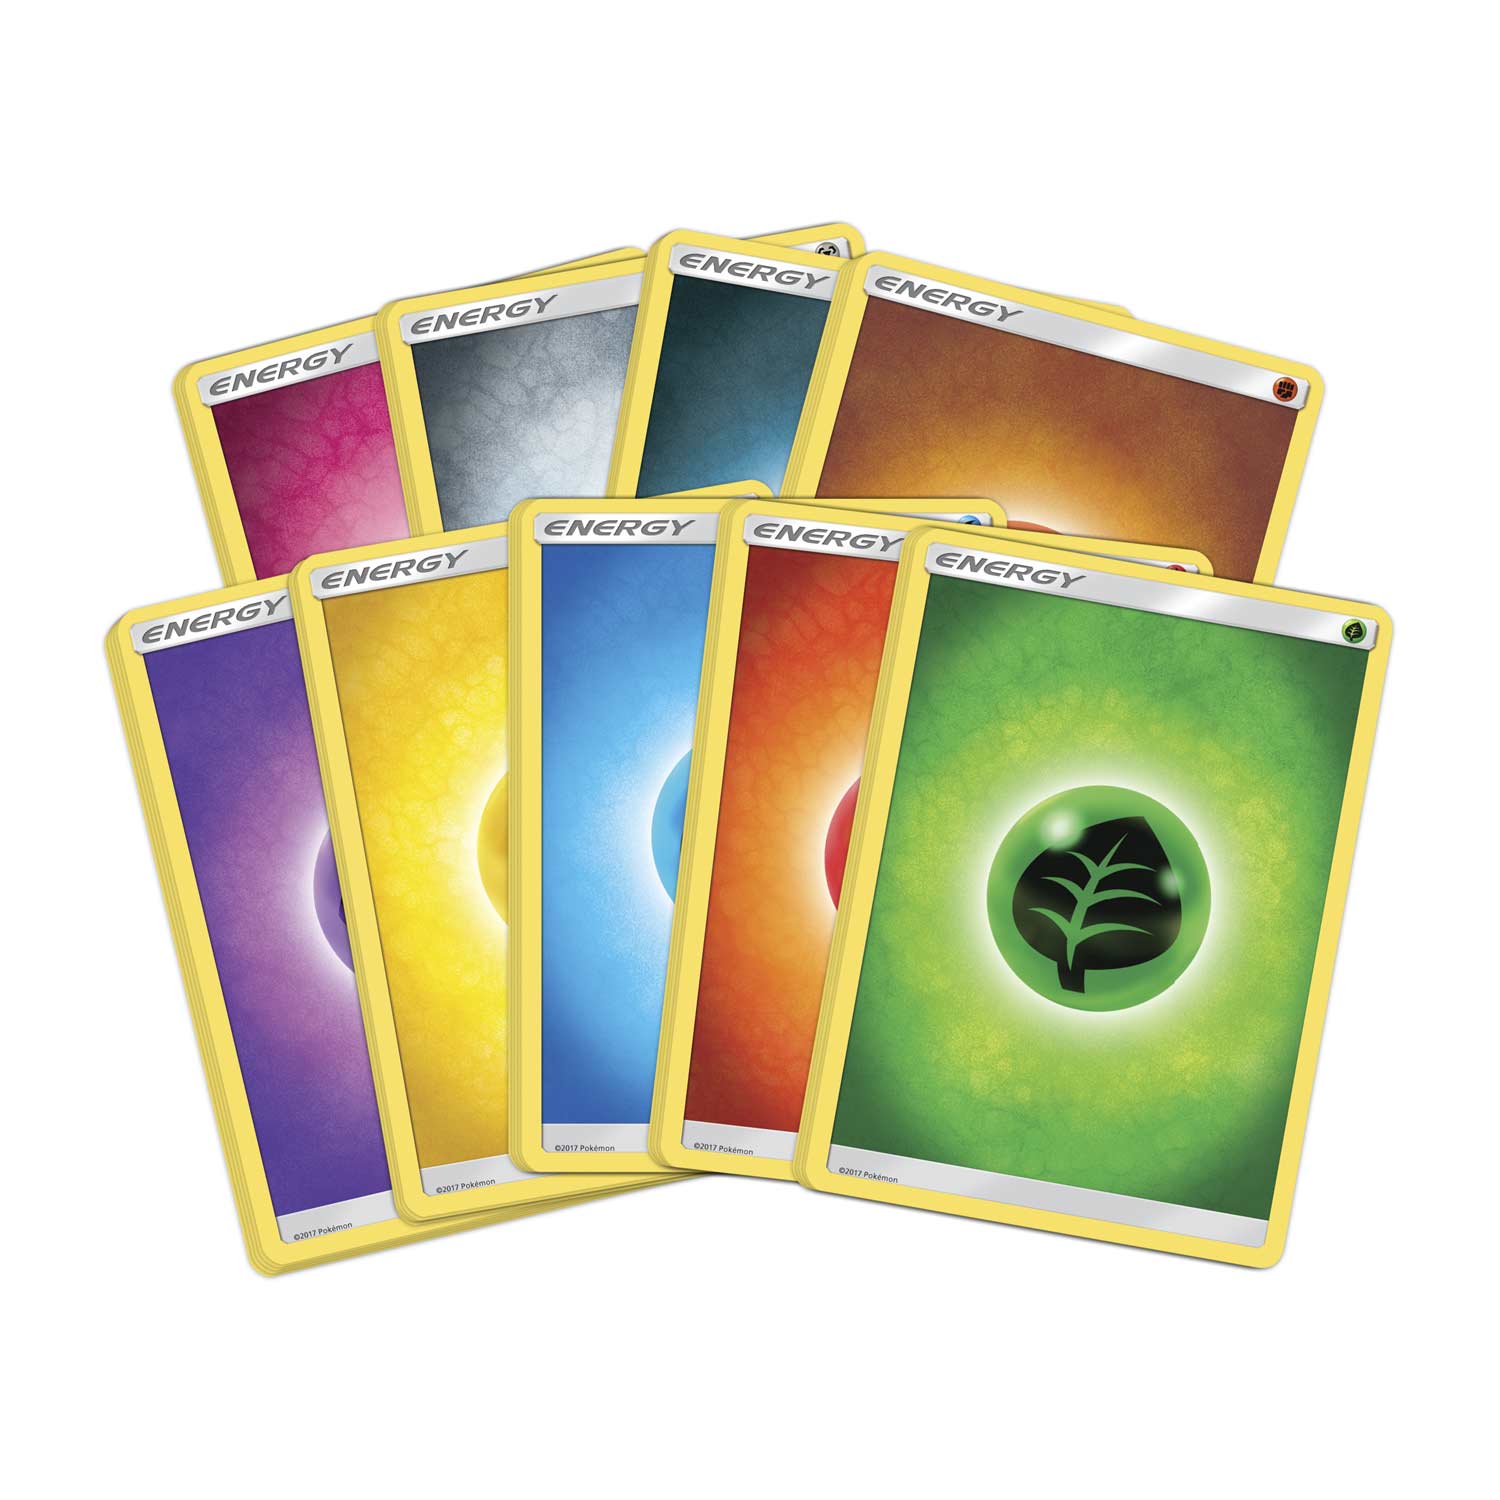 Image showing various energies that are included (in bulk quantity) in the elite trainer box.